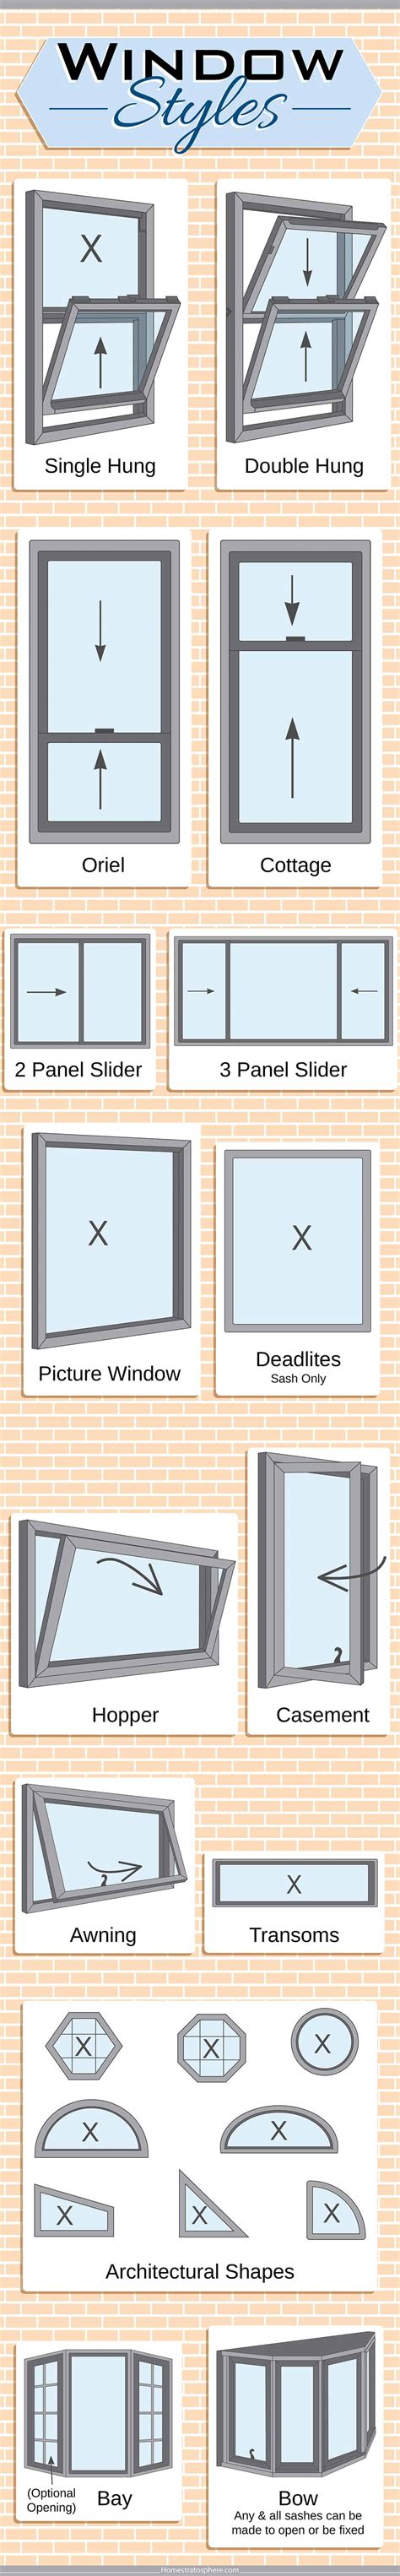 18 Types Of Windows Styles Panes And Frames